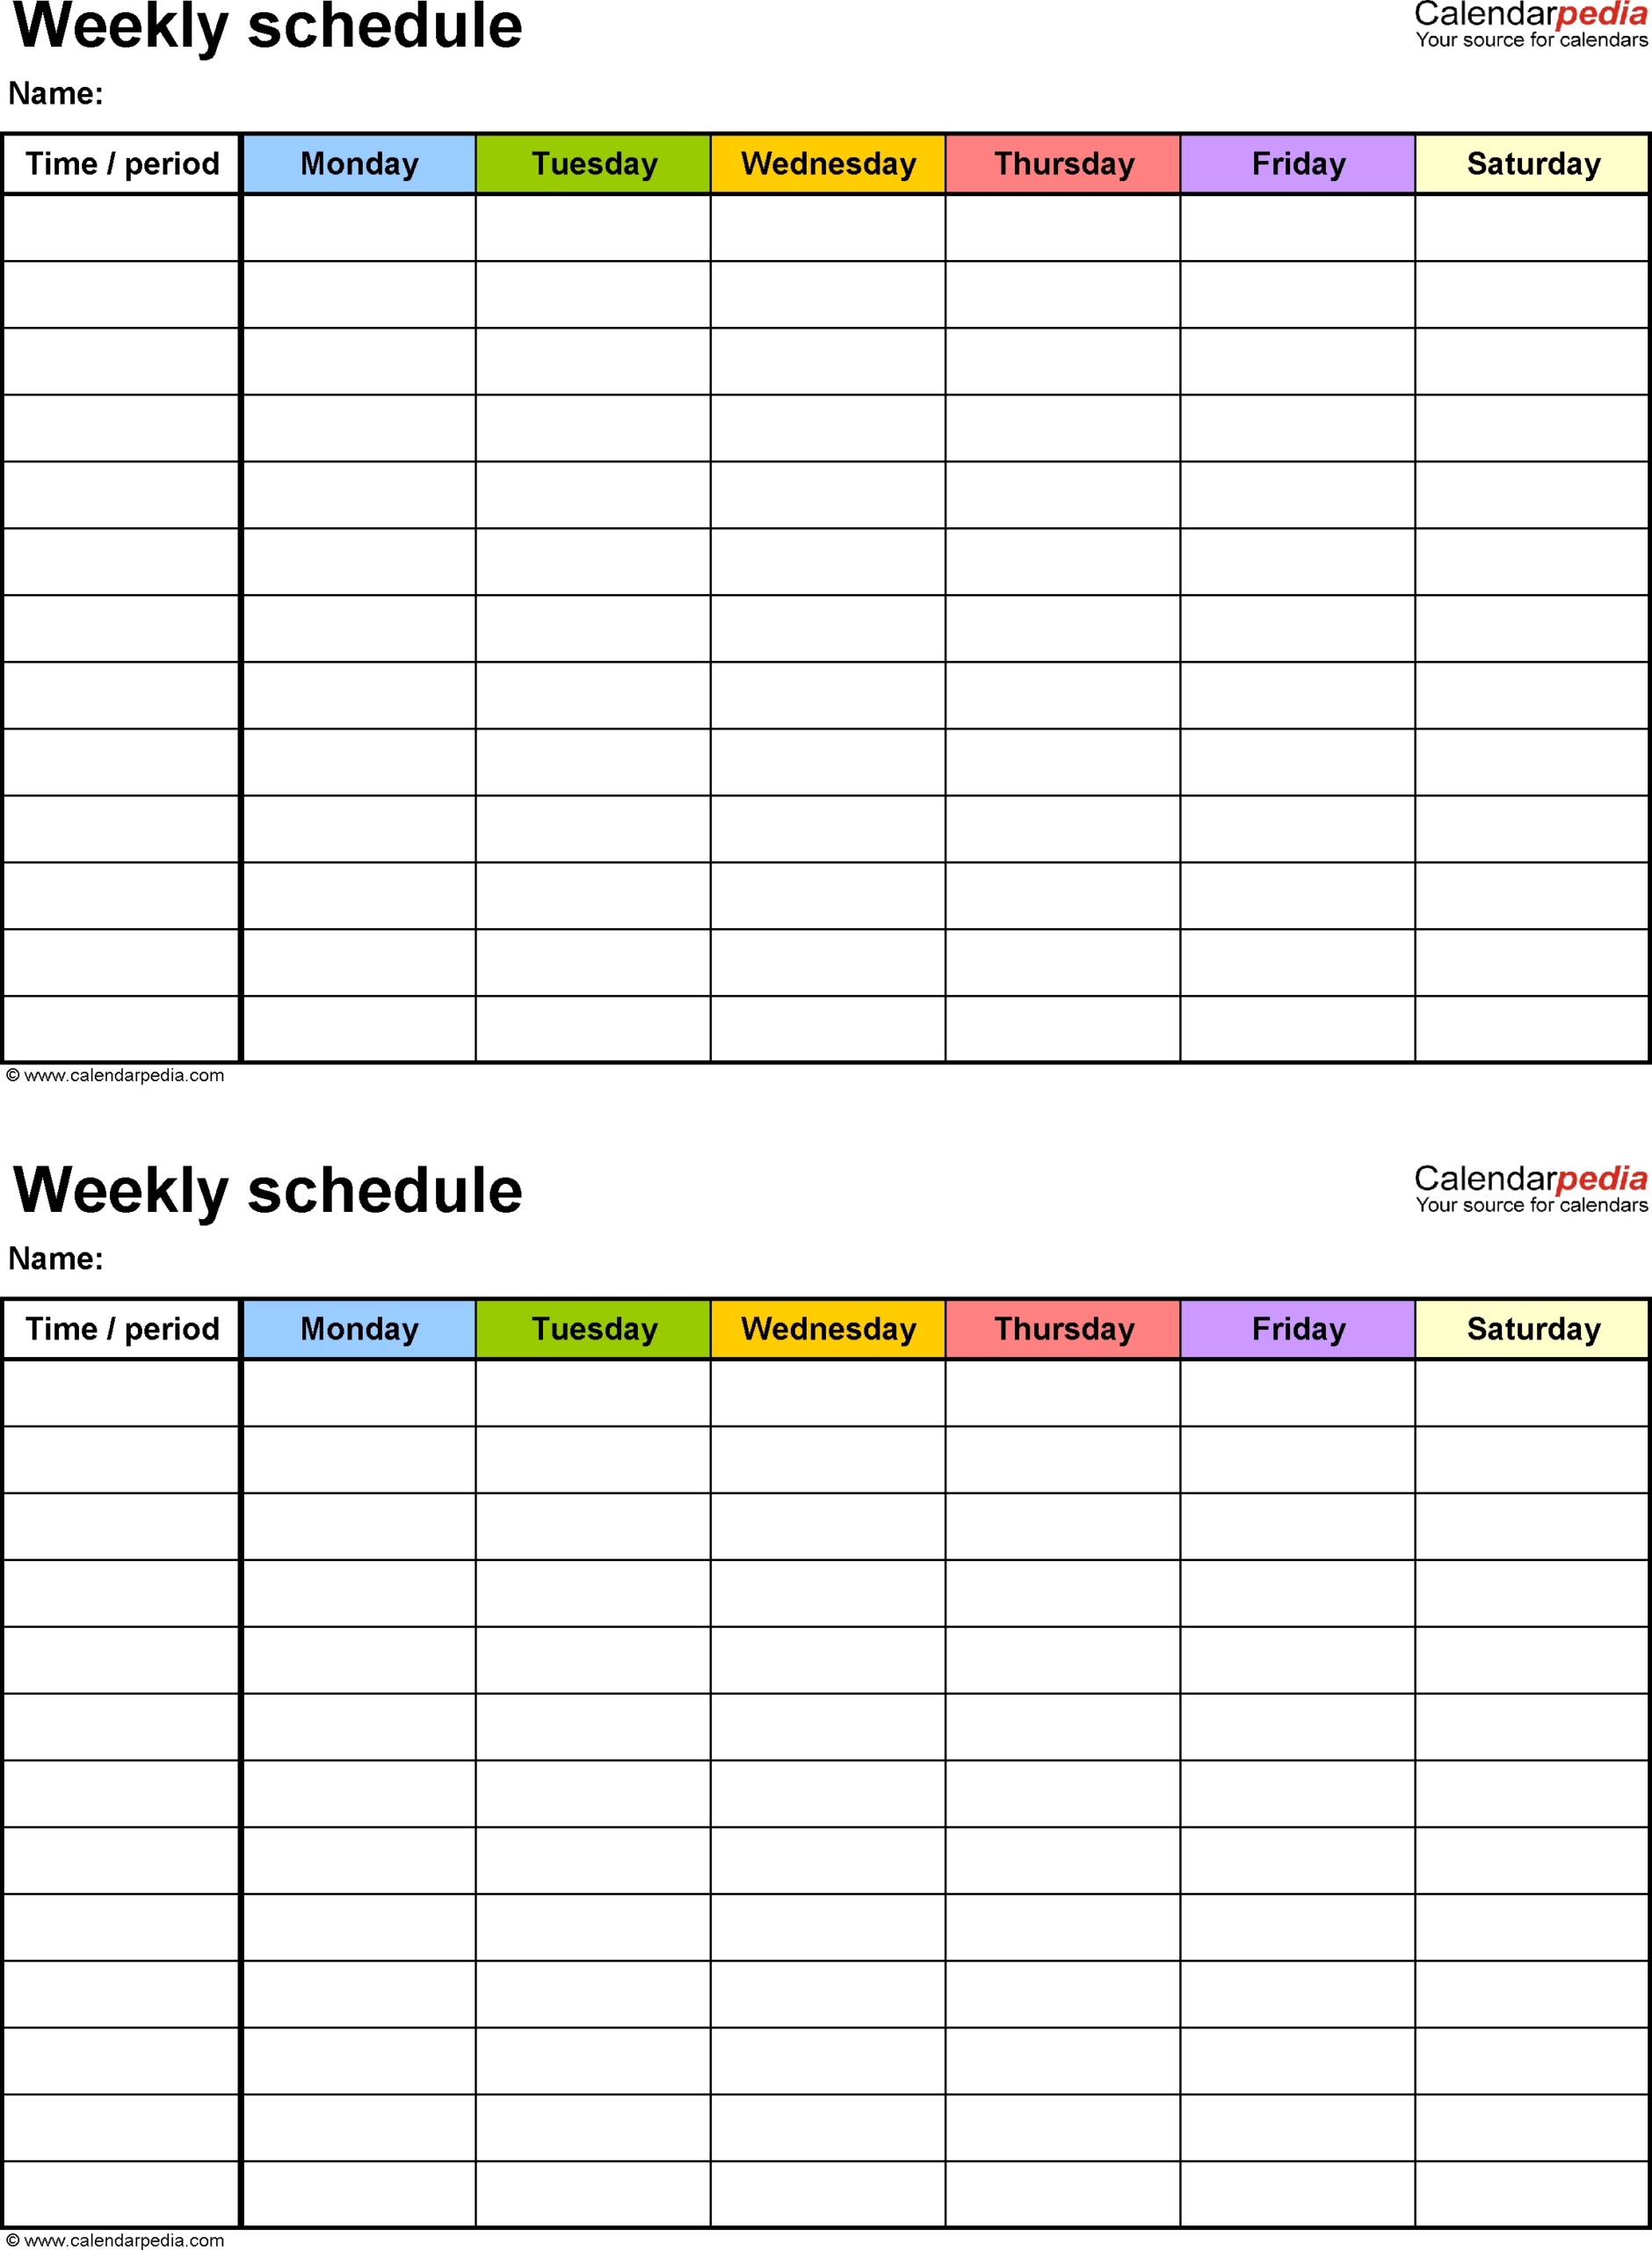 Weekly Planner With Time Slots Word Template - Calendar